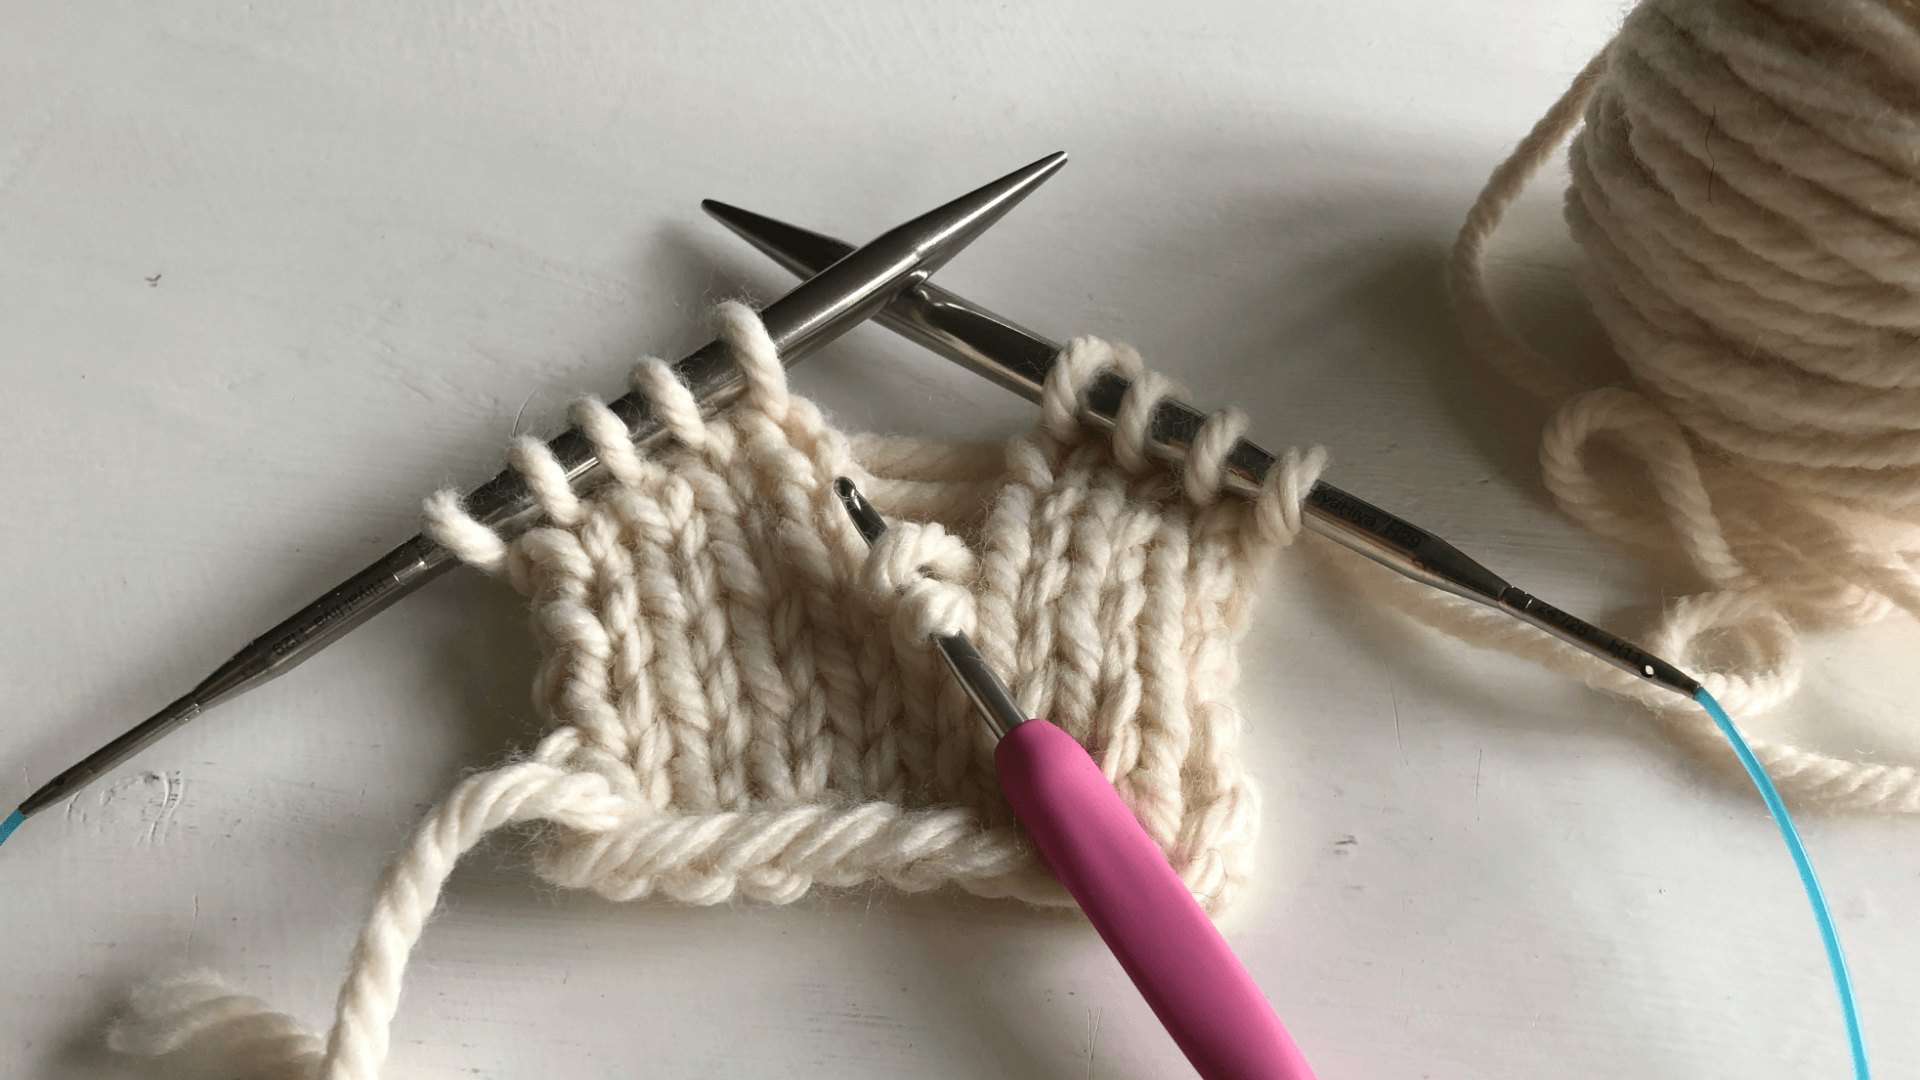 fix a dropped stitch by using the crochet hook to form new stitches all the way back up to the needle